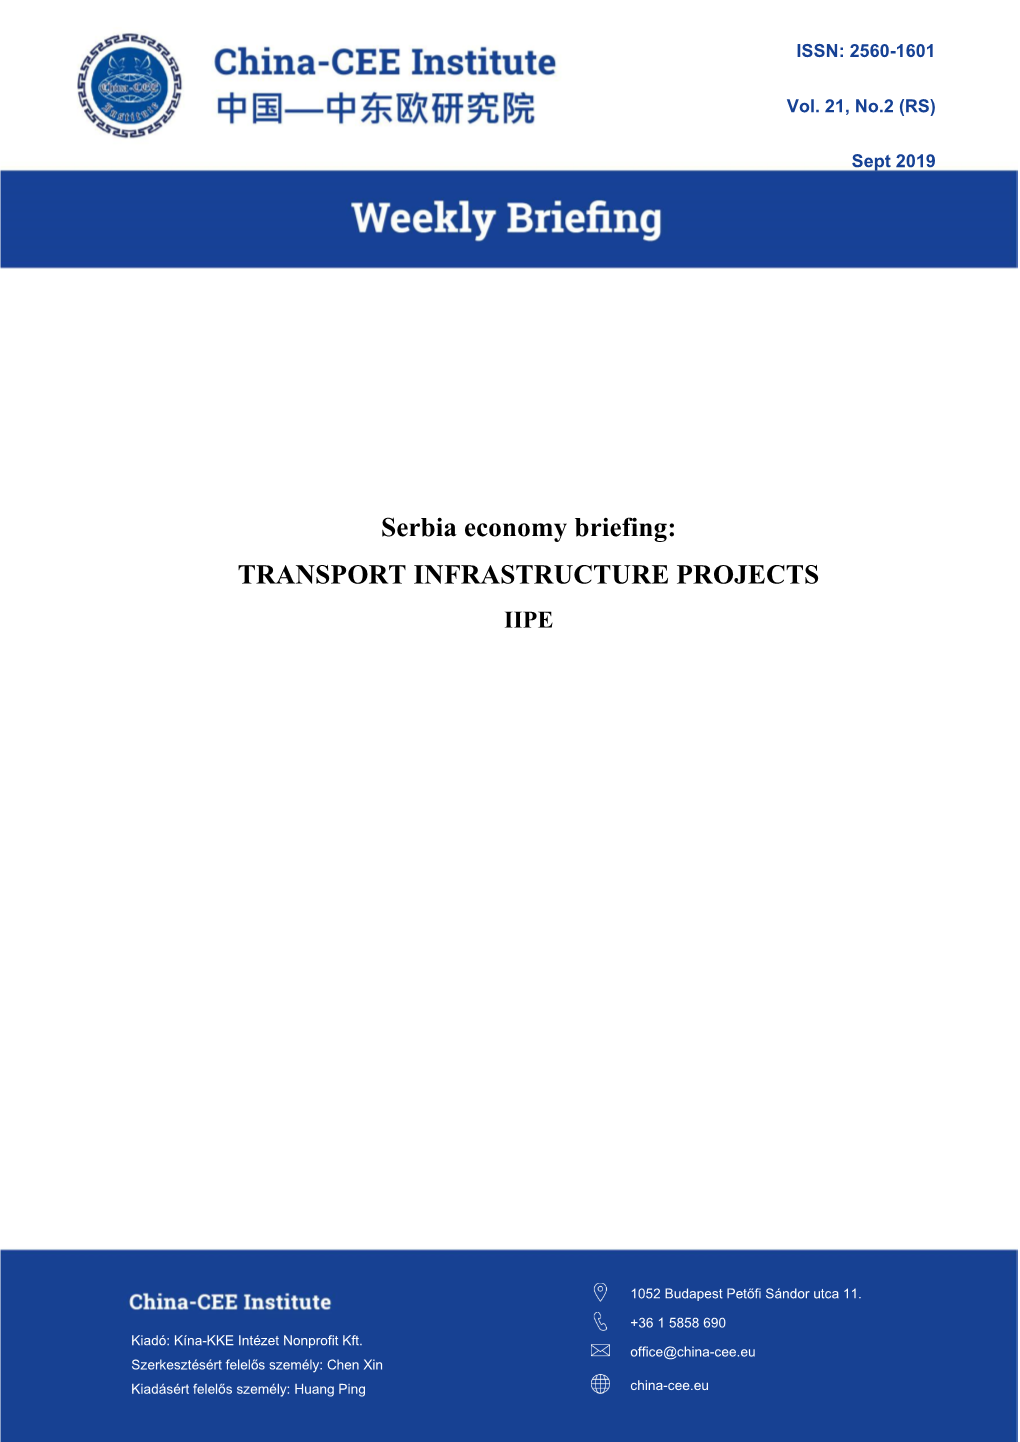 Serbia Economy Briefing: TRANSPORT INFRASTRUCTURE PROJECTS IIPE